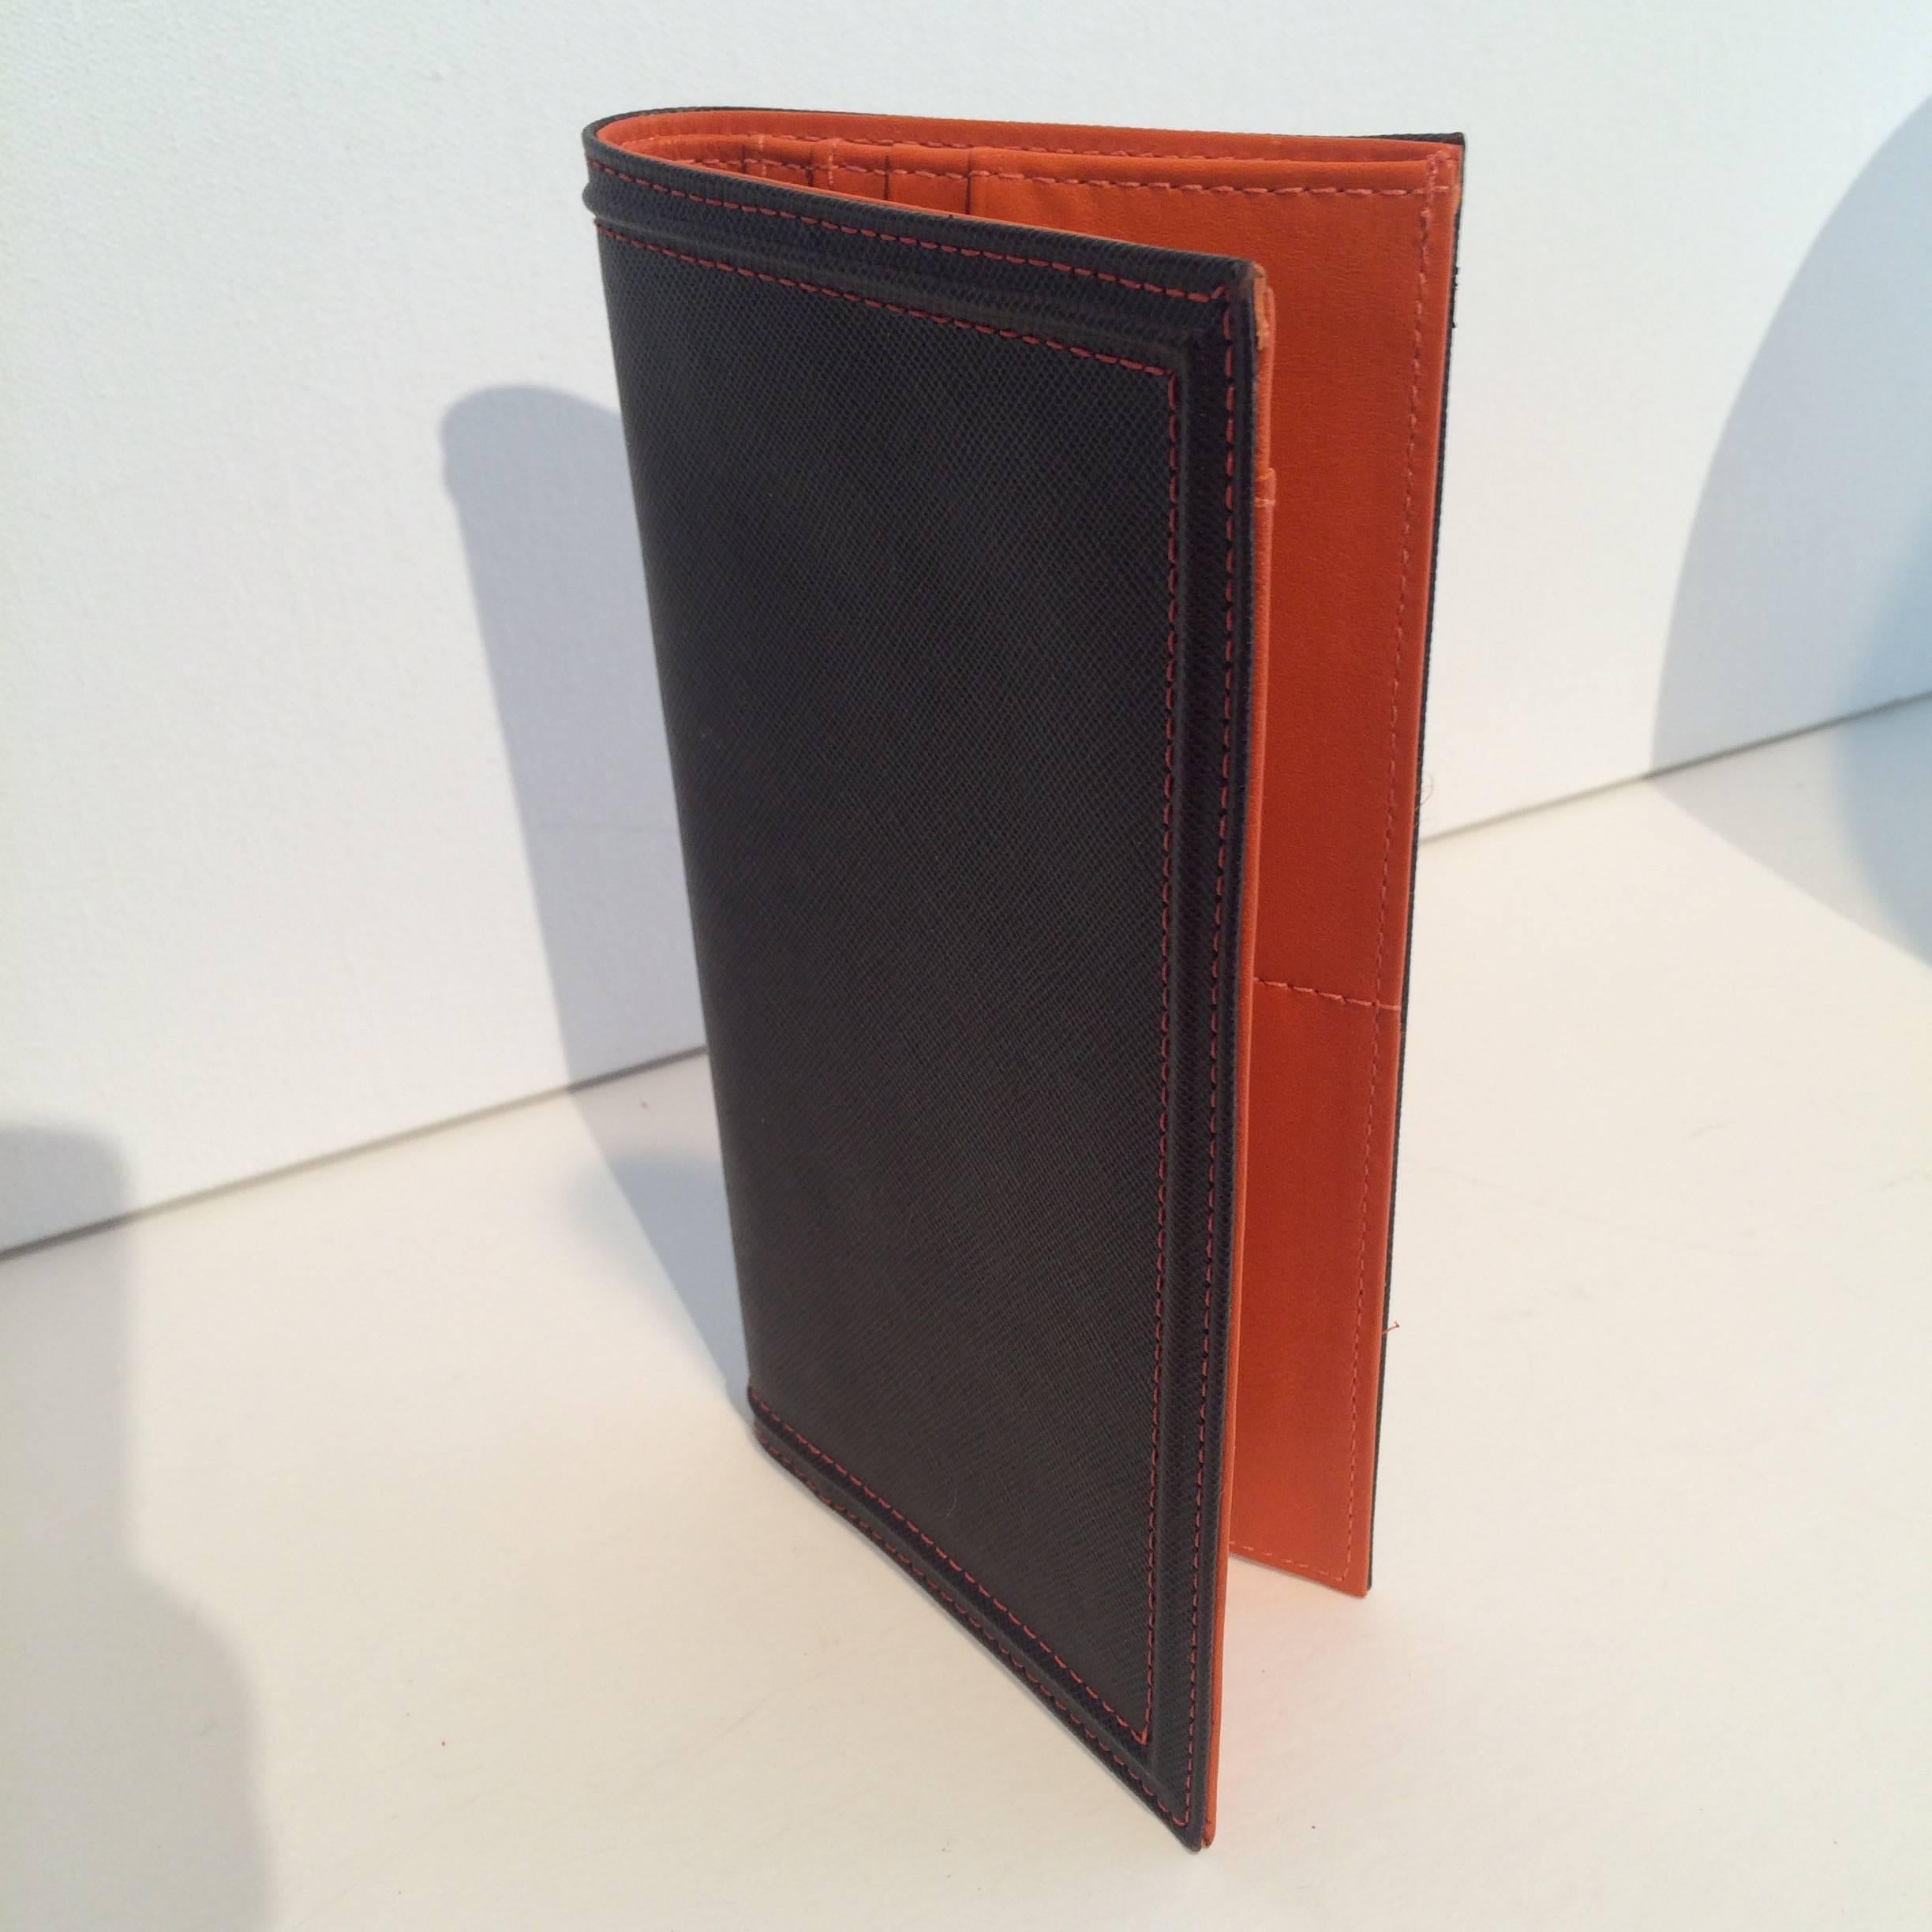 Never used Etro Wallet with stunning, typical Etro signature orange.  Holds 6 credit cards, papers and Check book